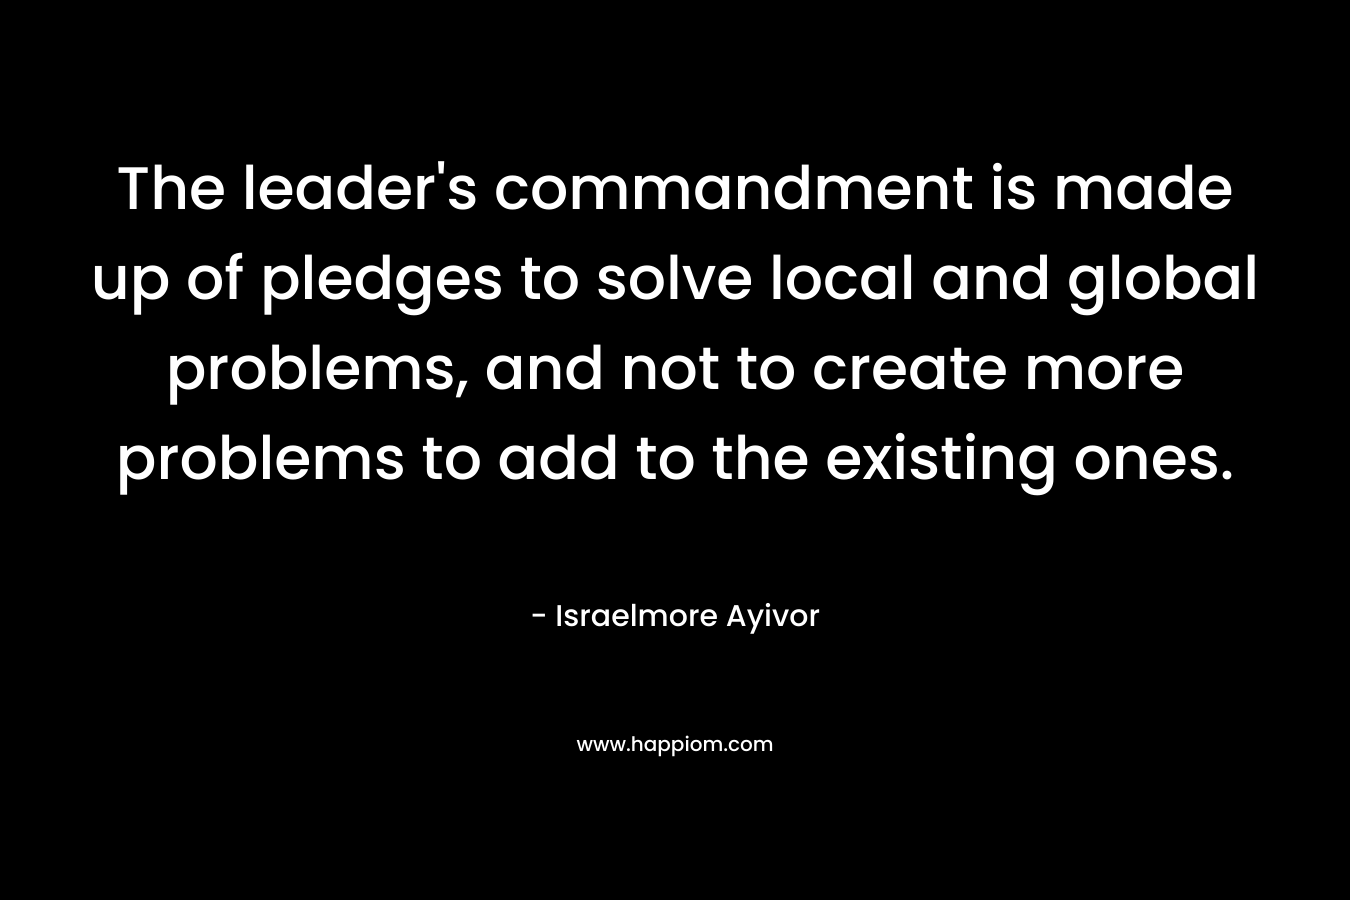 The leader’s commandment is made up of pledges to solve local and global problems, and not to create more problems to add to the existing ones. – Israelmore Ayivor